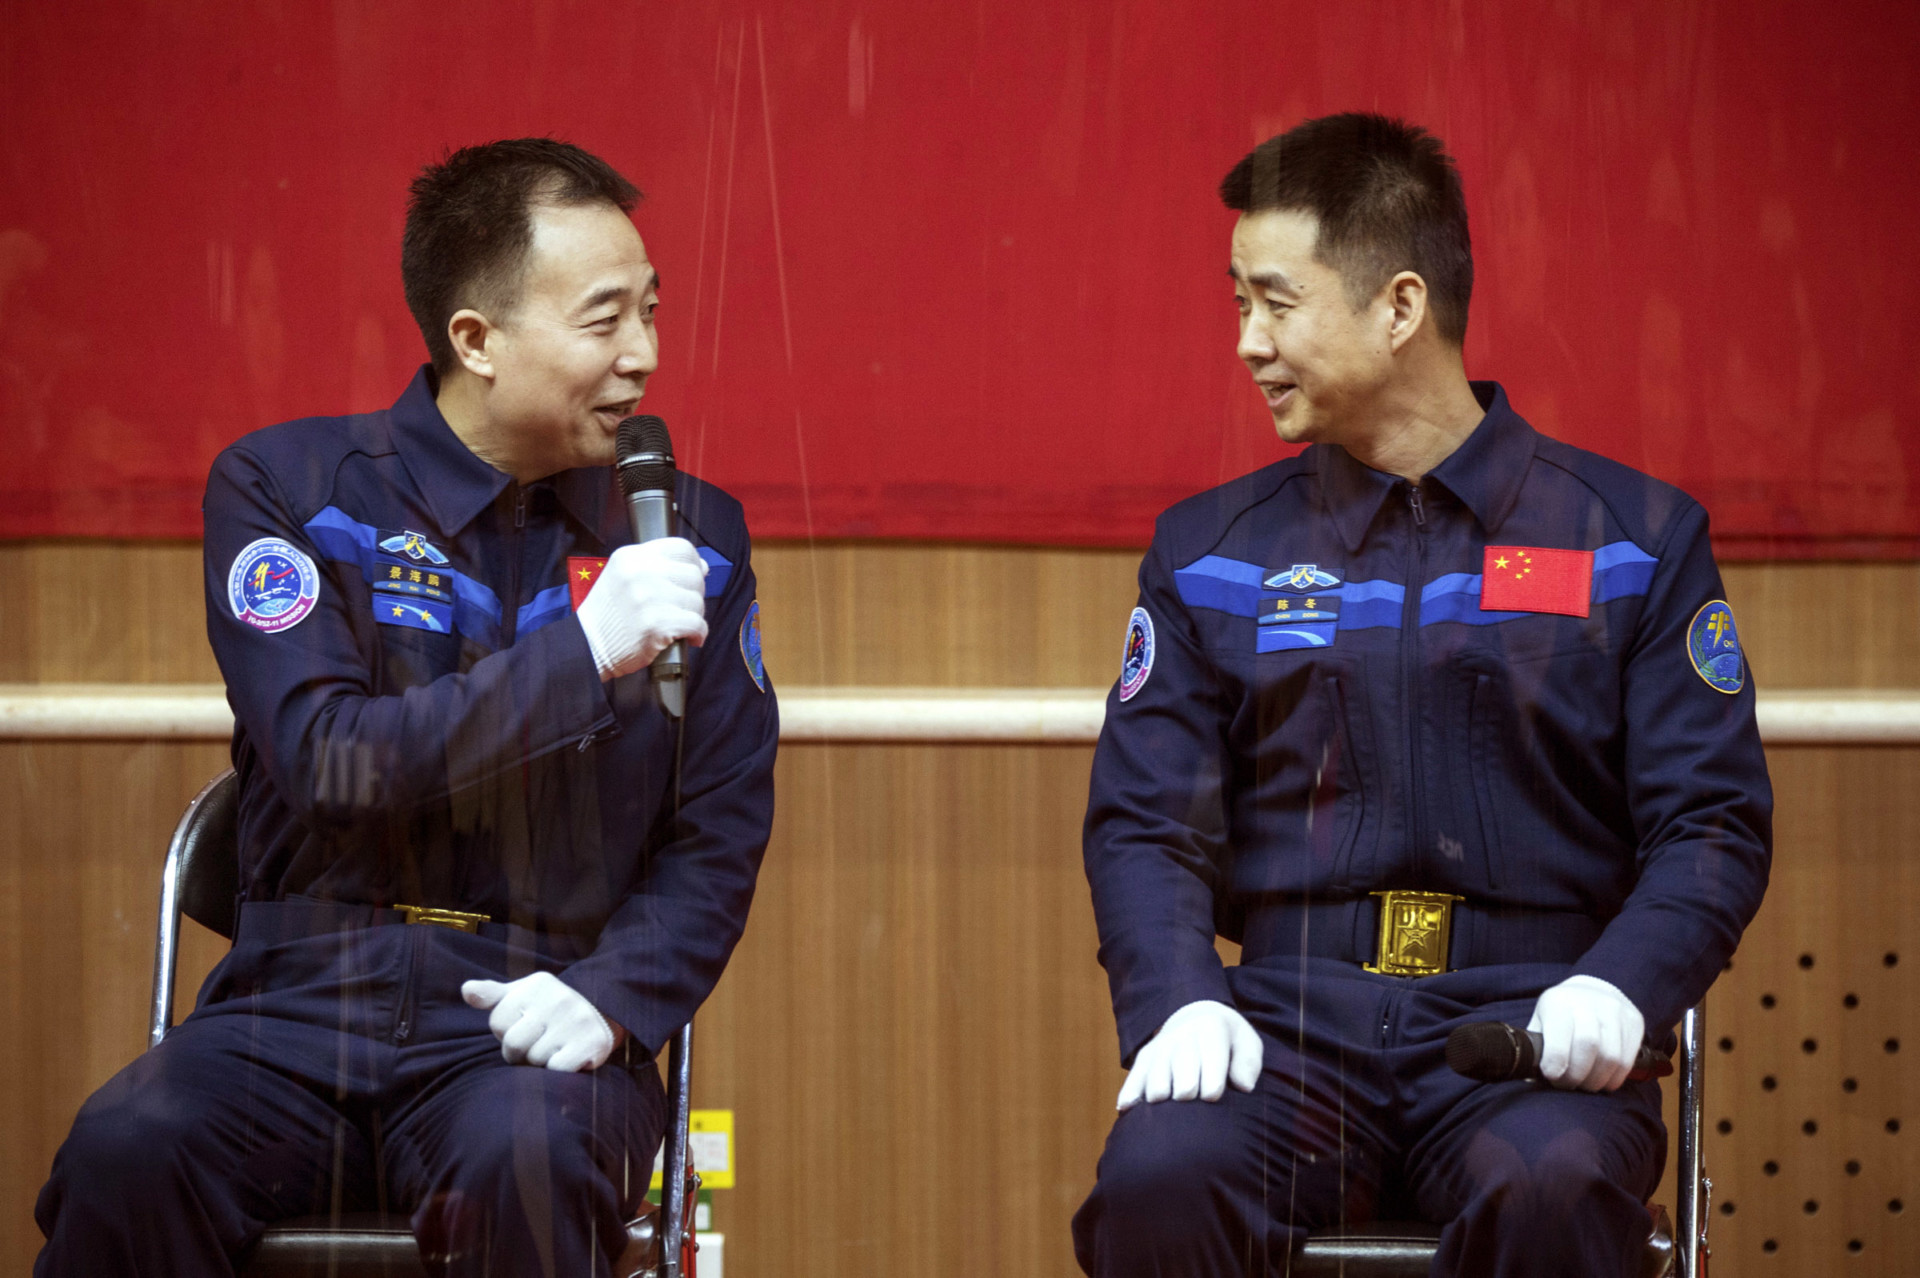 Chinese astronauts Jing Haipeng, left, and Chen Dong, right, chat behind a glass enclosure during a presser at the Jiuquan Satellite Launch Center in northwest China Sunday Oct. 16, 2016. (Chinatopix Via AP)